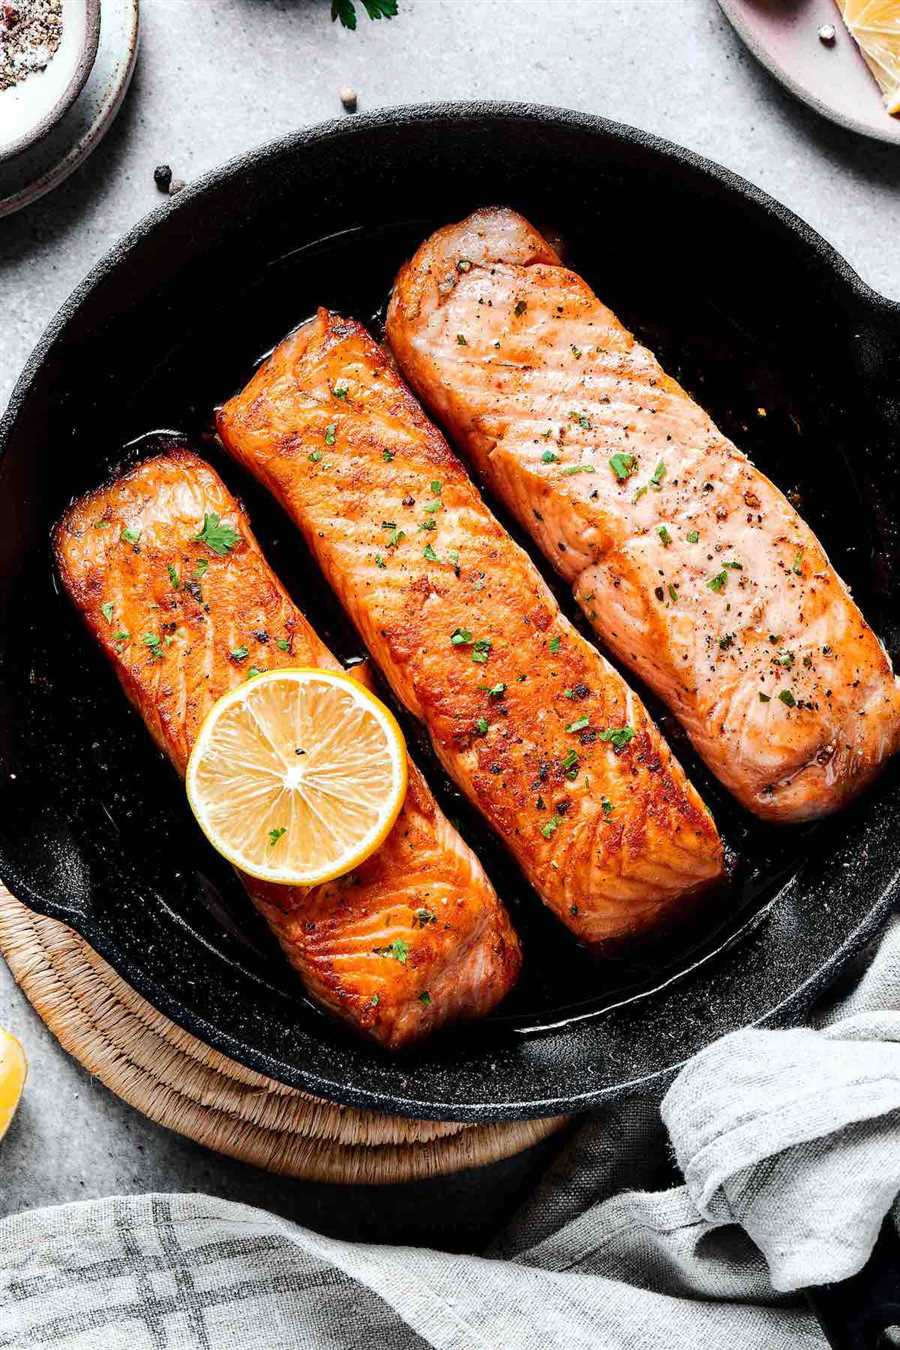 How to prepare the salmon for cooking in a cast iron skillet